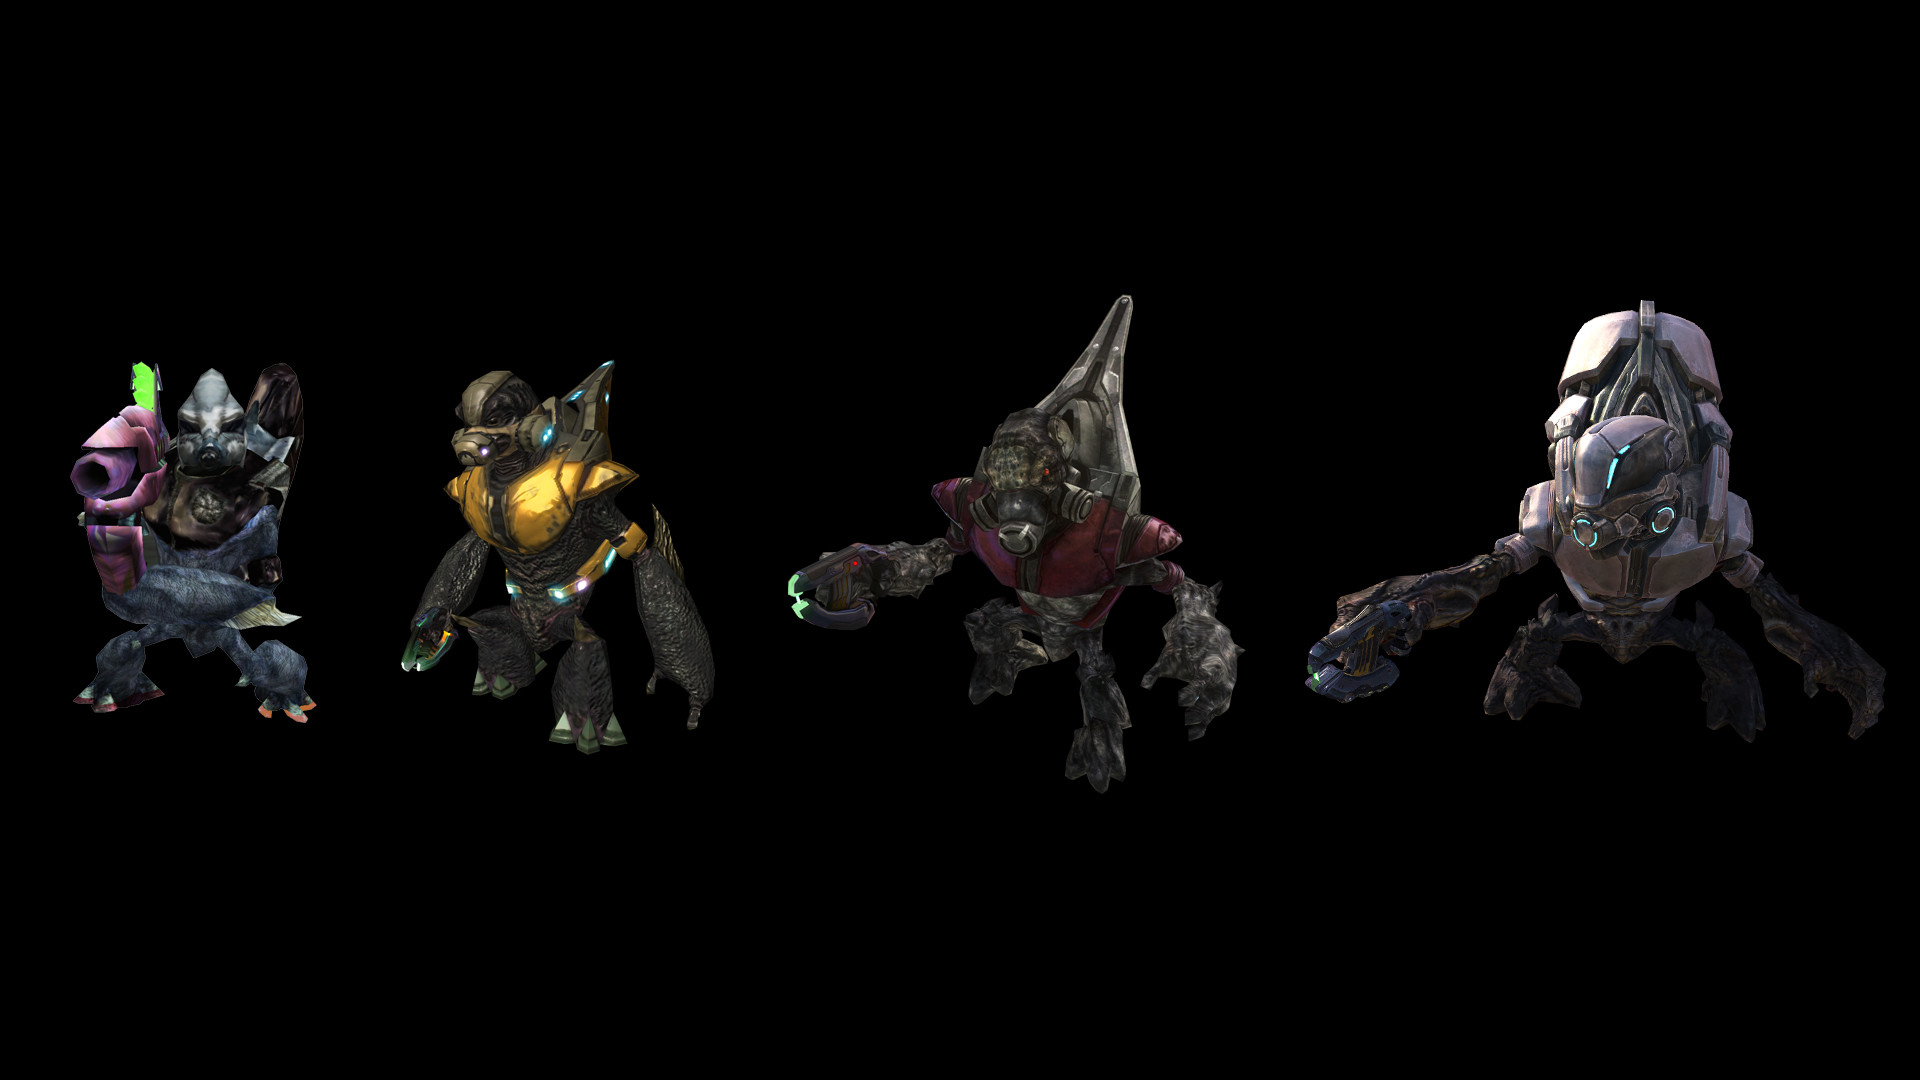 1920x1080 1331 - Covenant Grunt: Evolution of Grunt models, from Halo: Combat Evolved  to